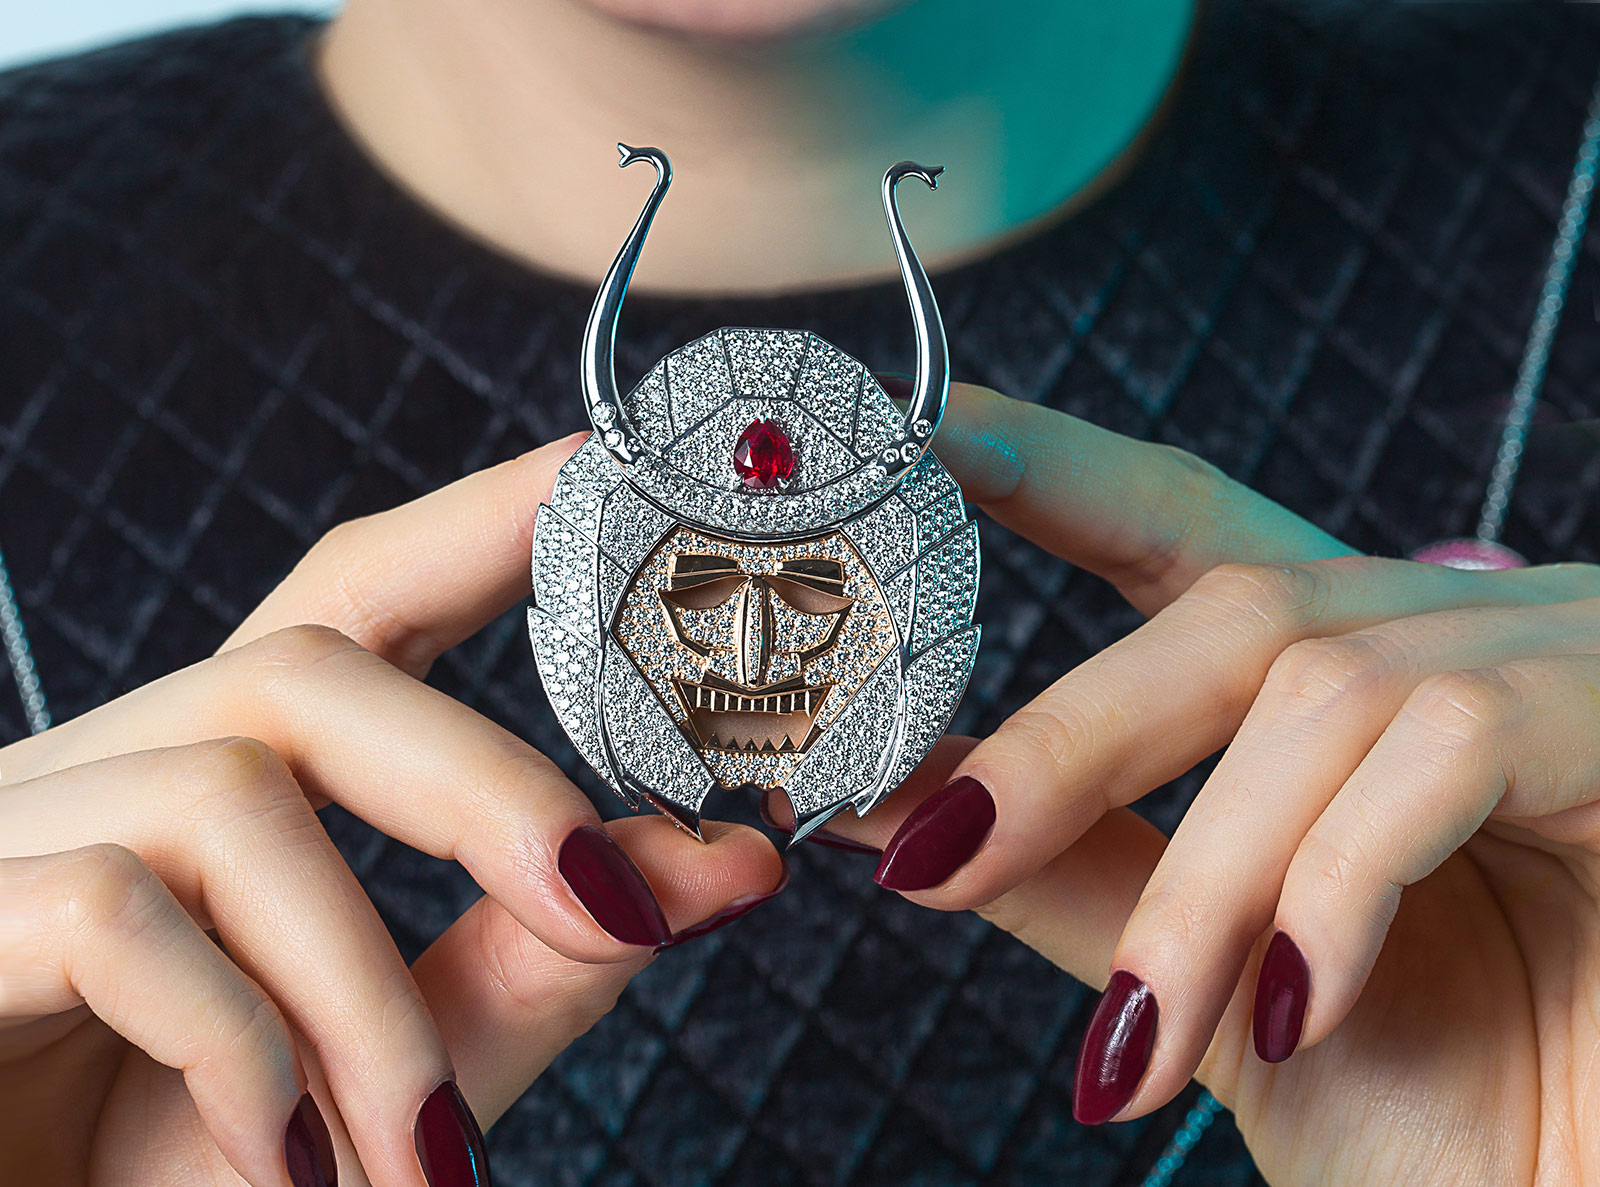 Julian Pelliccia’s Samurai belt buckle represents the helmet and mask of the Samurai warrior, complete with 764 diamonds and a natural, unheated pear-shaped ruby from Mozambique in 18k white and rose gold 